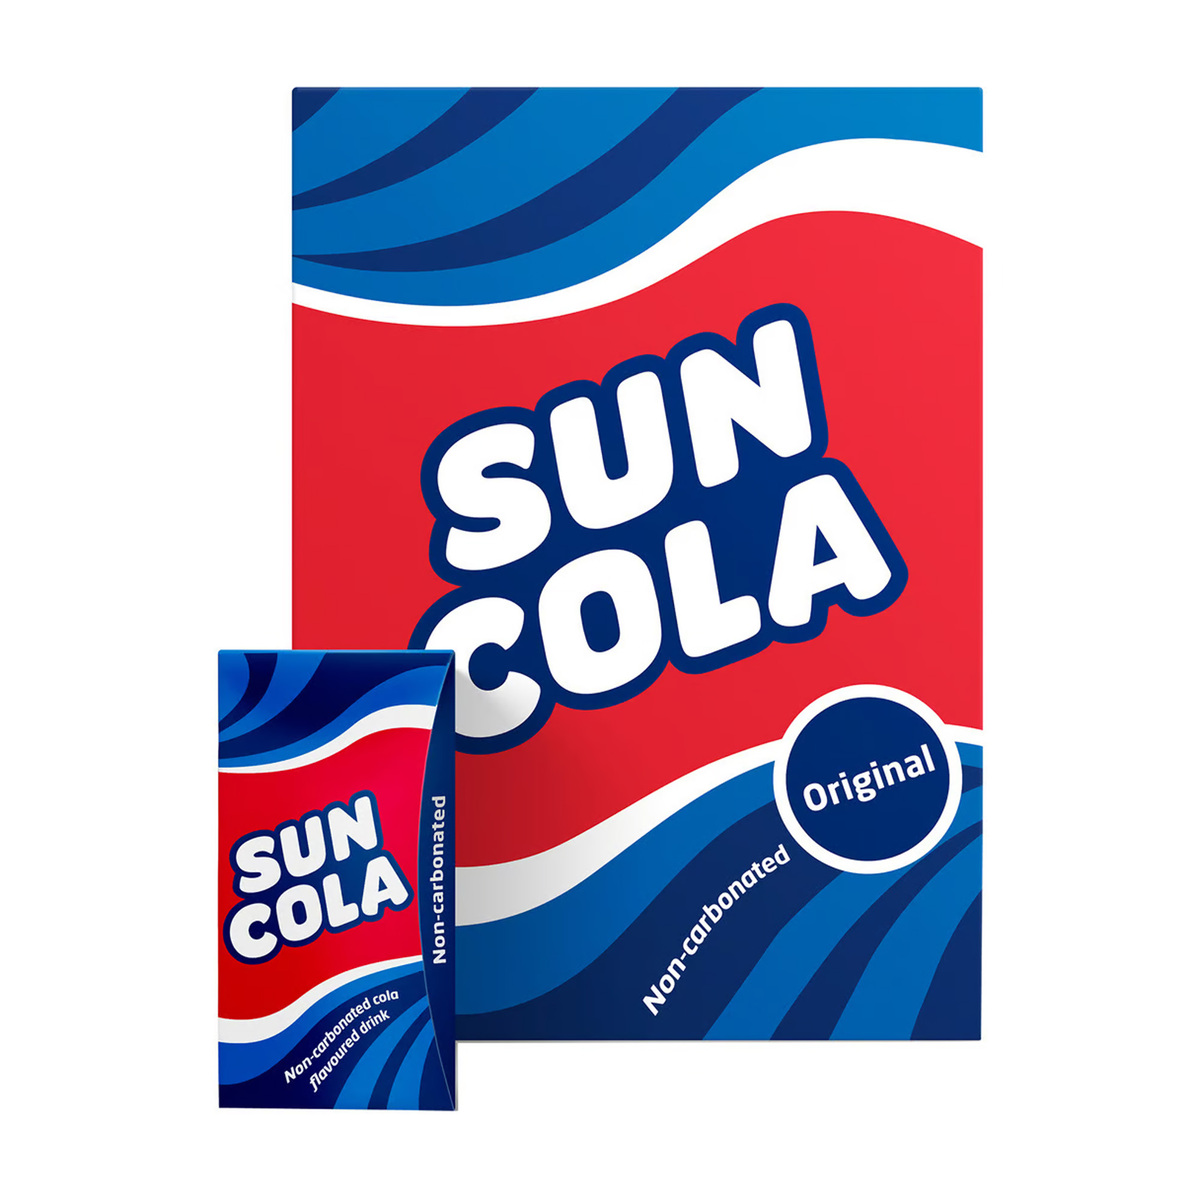 Suncola Non-Carbonated Cola Flavoured Drink 6 x 125 ml